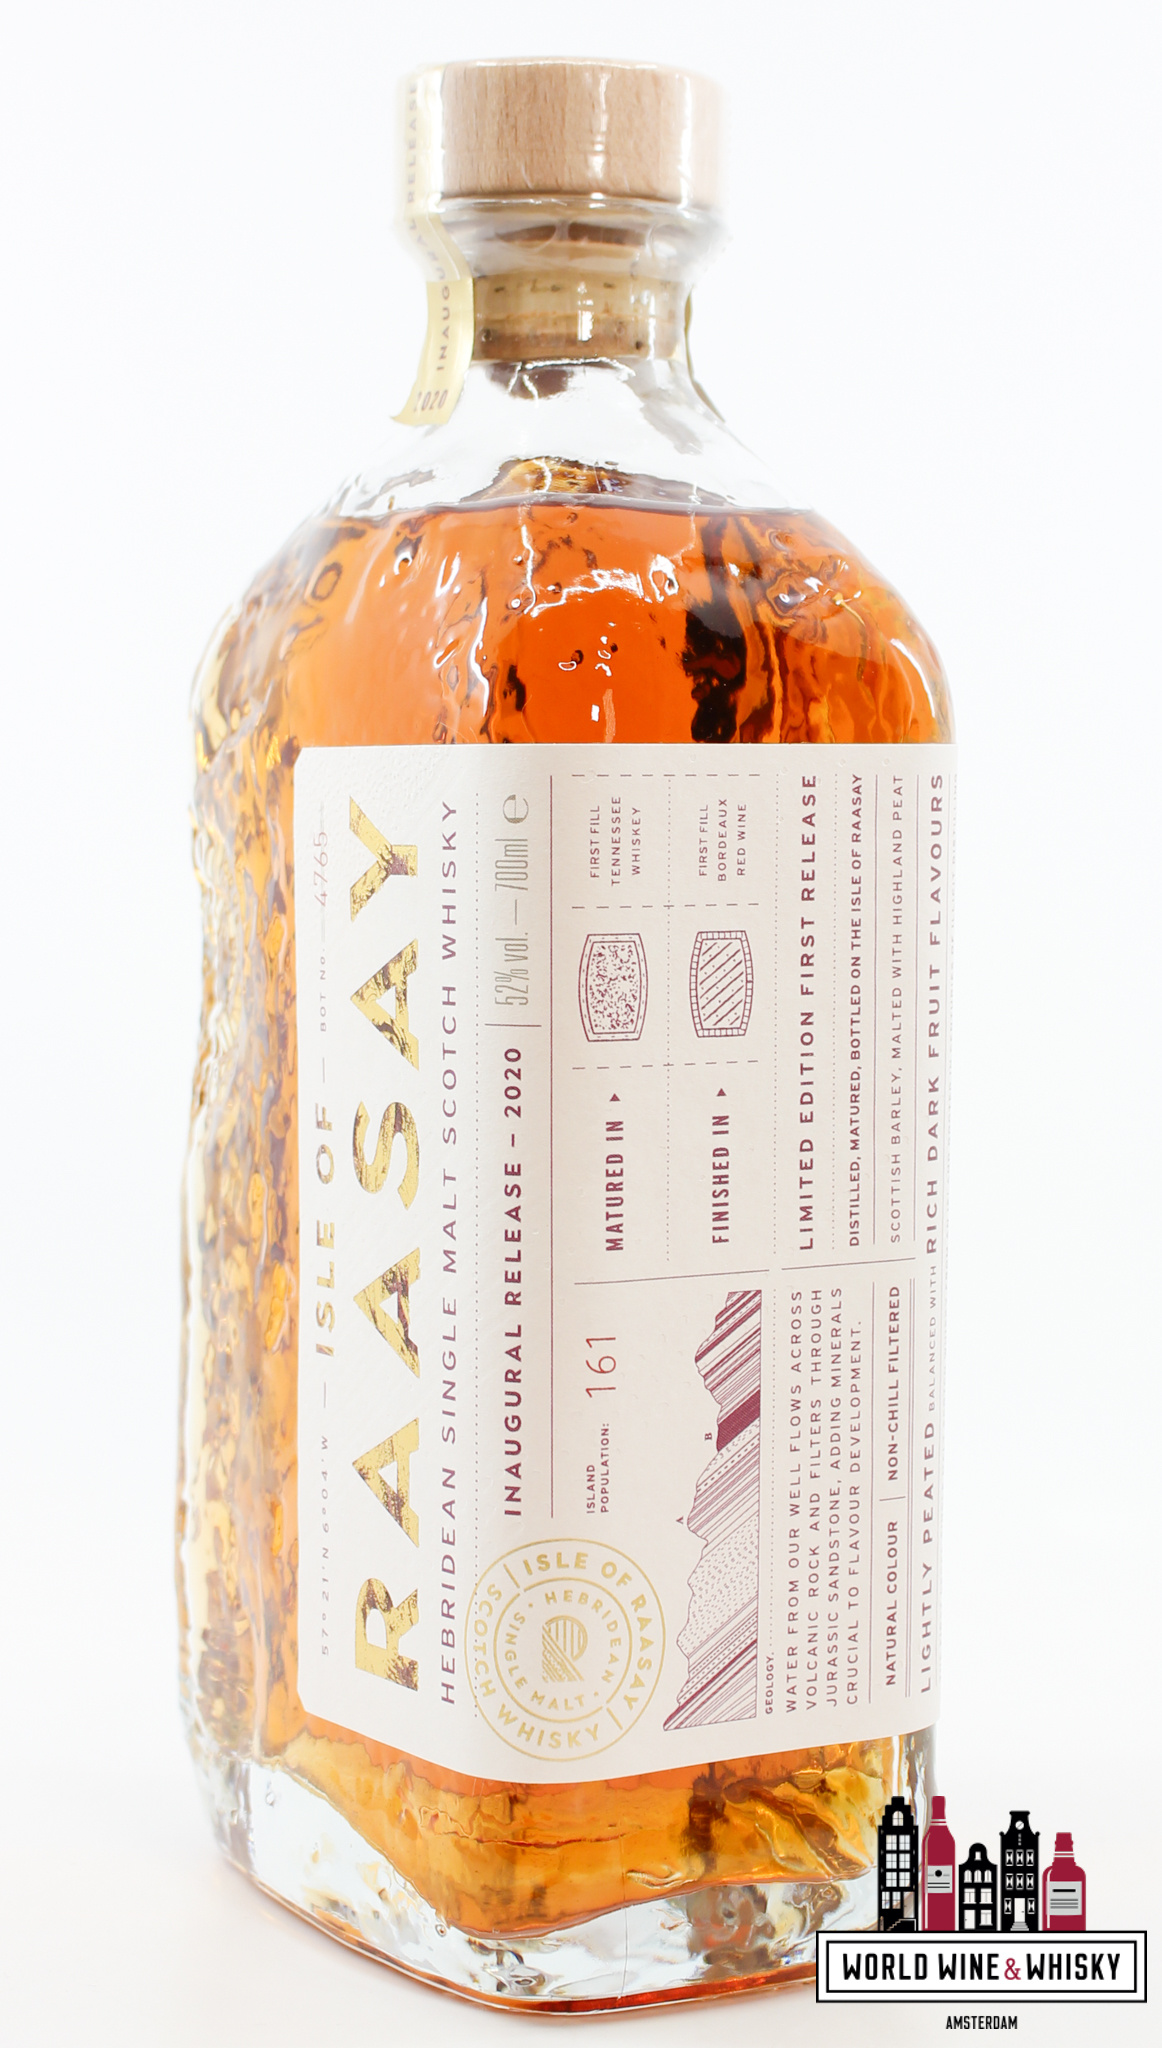 Isle of Raasay Isle of Raasay 3 Years Old 2017 2020 - First Release - Inaugural Limited Release 52% (1 of 7500)